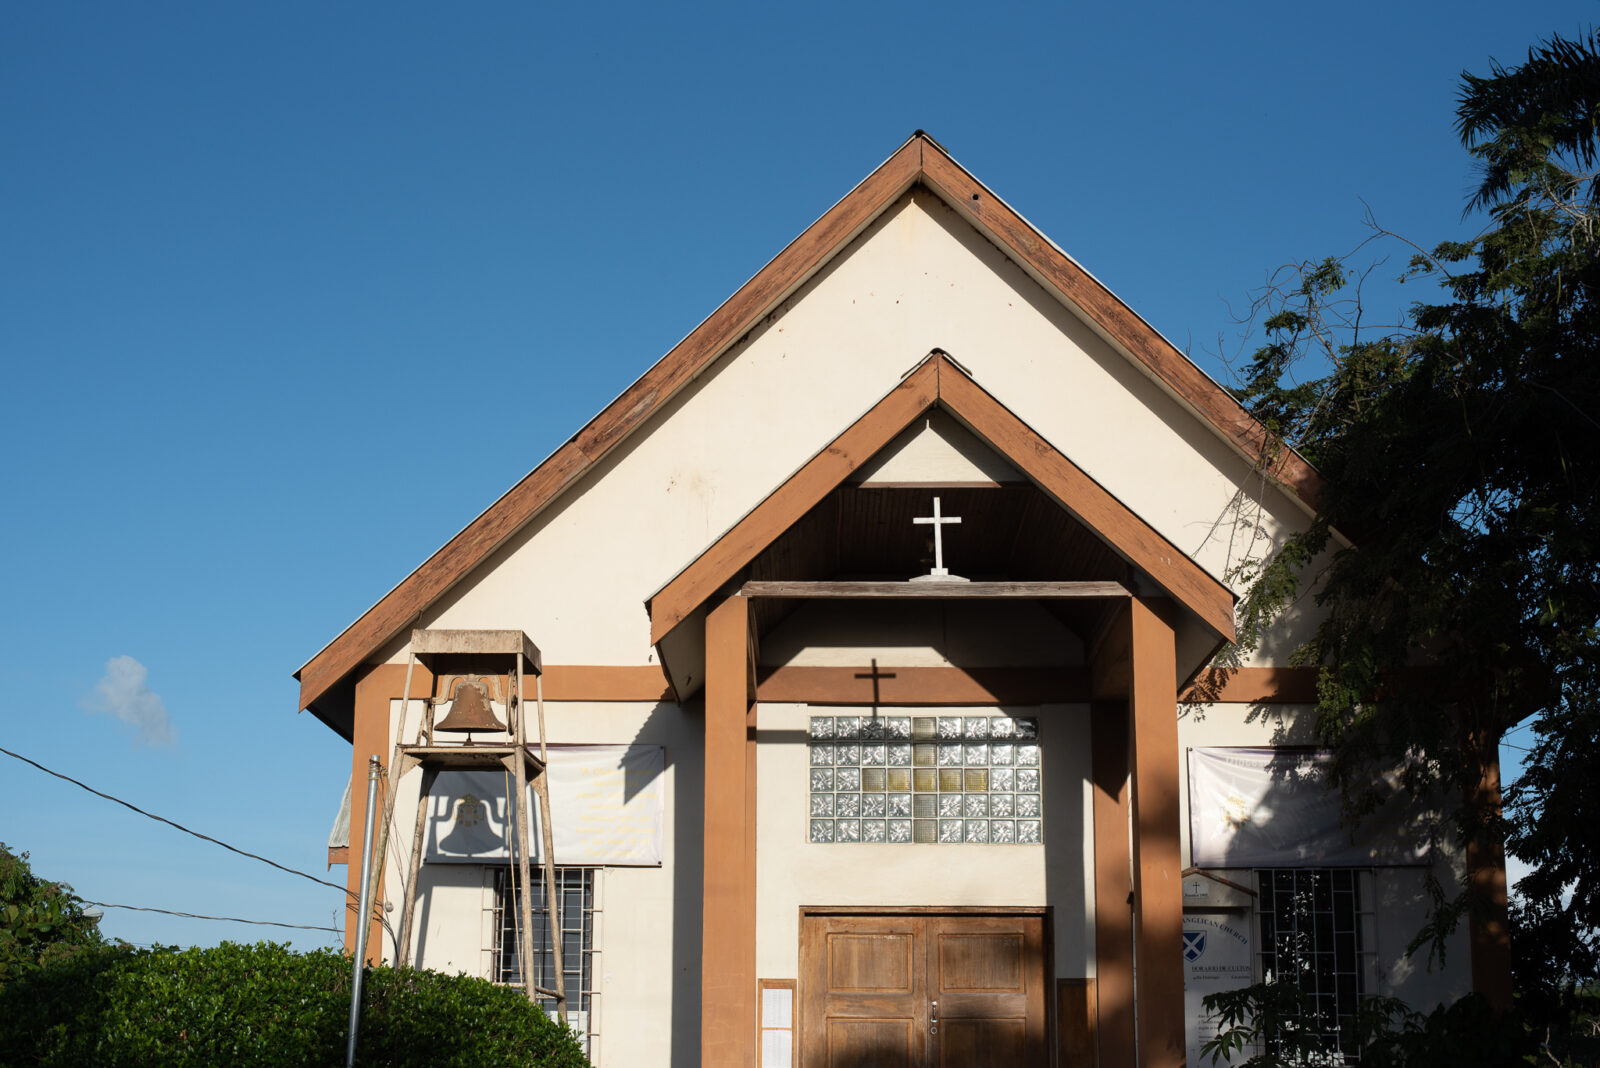 small church building with a cross over the front entrance